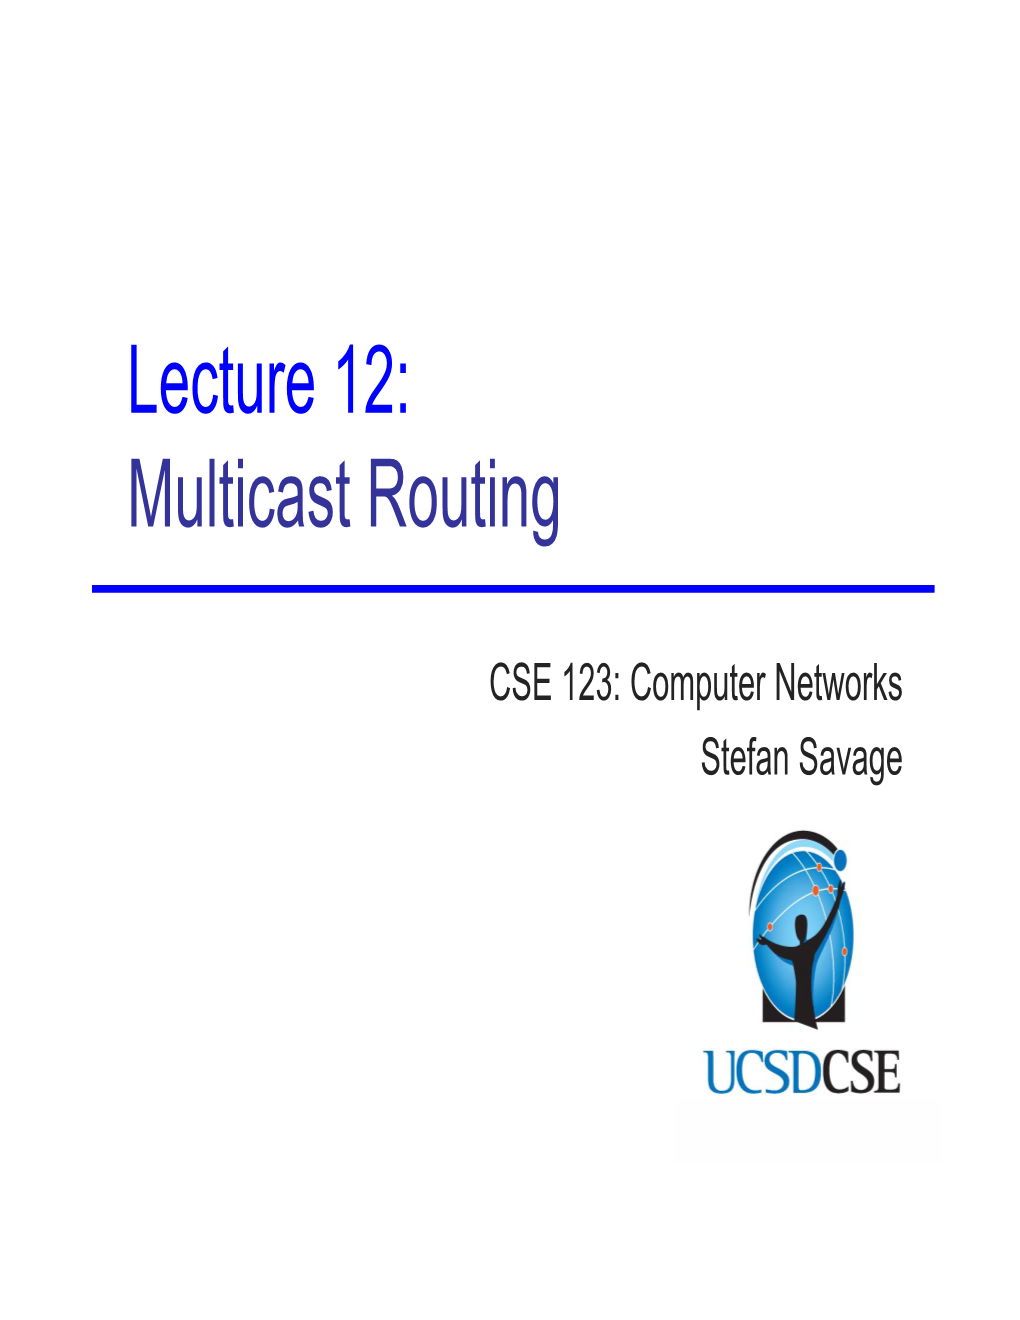 Multicast Routing